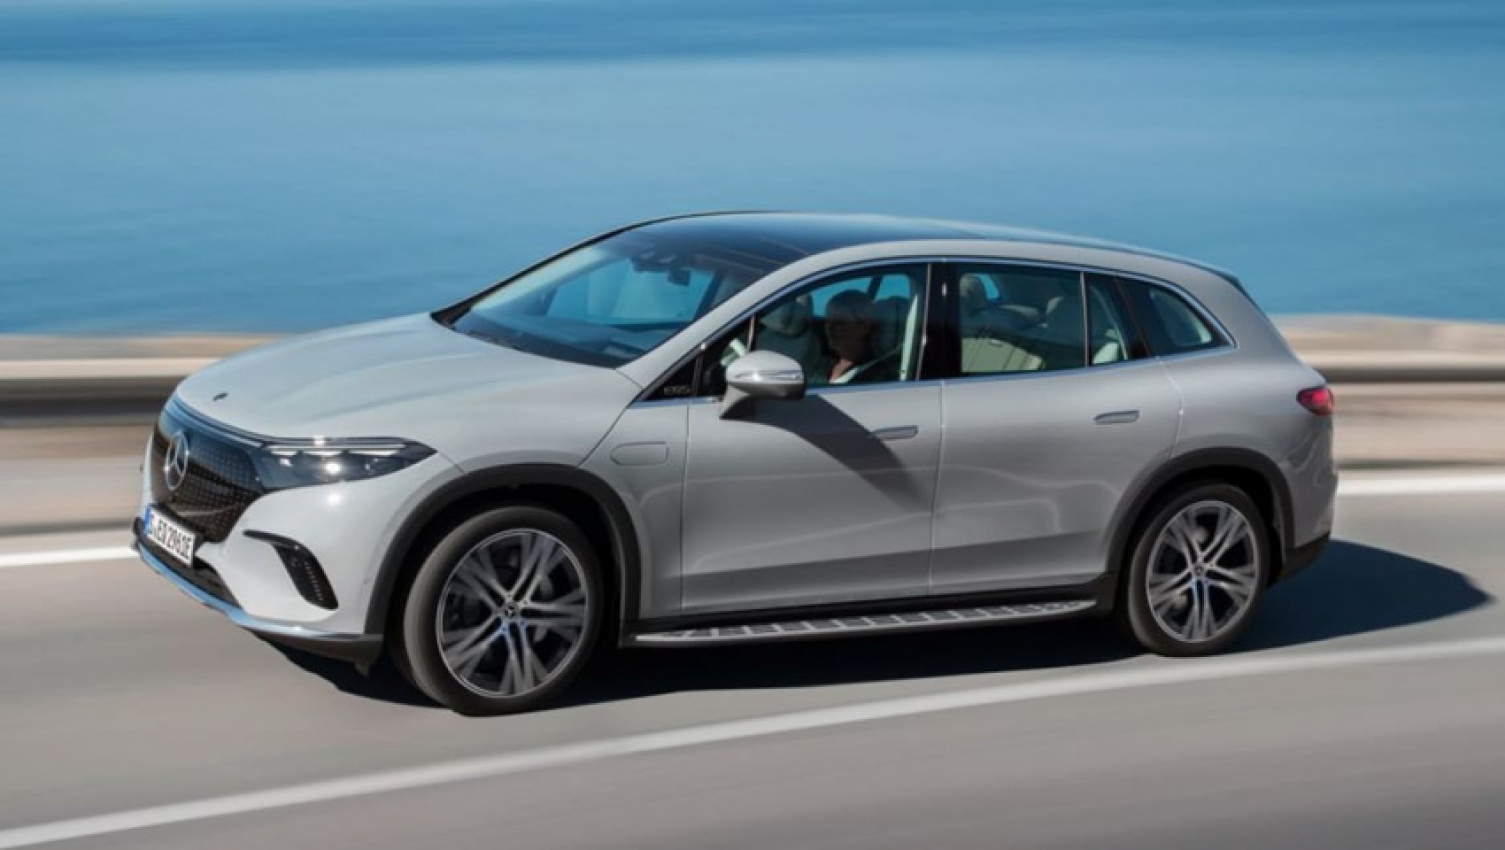 autos, cars, mercedes-benz, tesla, electric, electric cars, industry news, mercedes, mercedes-benz eq-class, mercedes-benz eq-class eqs, mercedes-benz news, mercedes-benz suv range, prestige & luxury cars, showroom news, tesla model x, is this the biggest rival for the tesla model x yet? 2023 mercedes-benz eqs seven-seat suv to debut in australia next year as premium flagship electric car